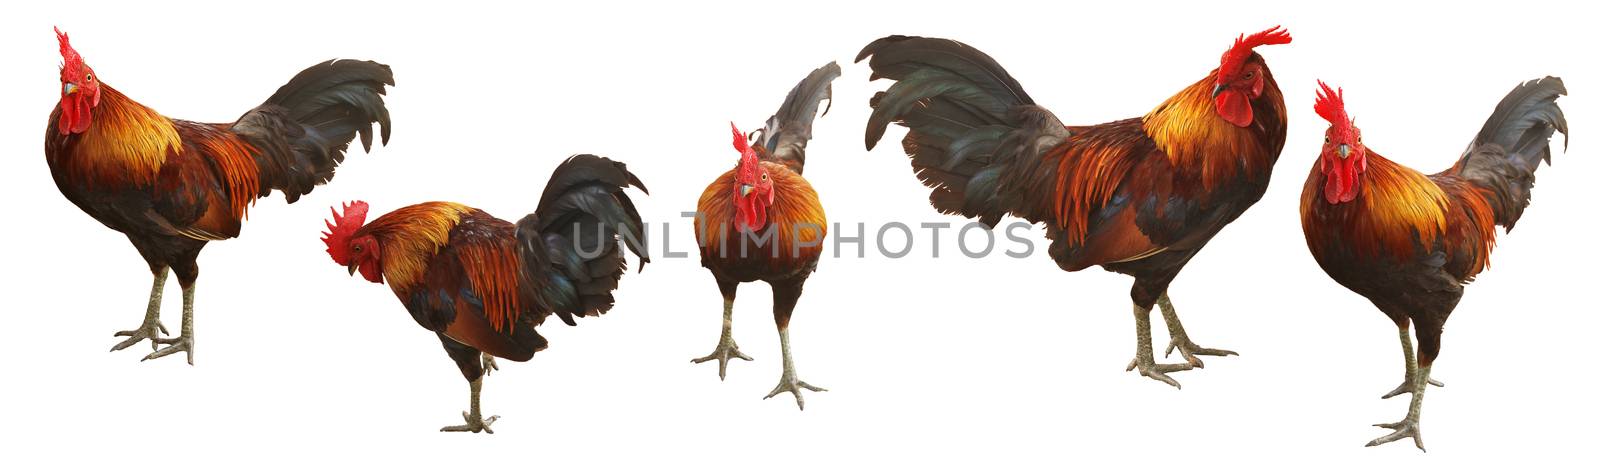 Bantam Chad, Thai chicken breed on white background. (With Clipping Path).